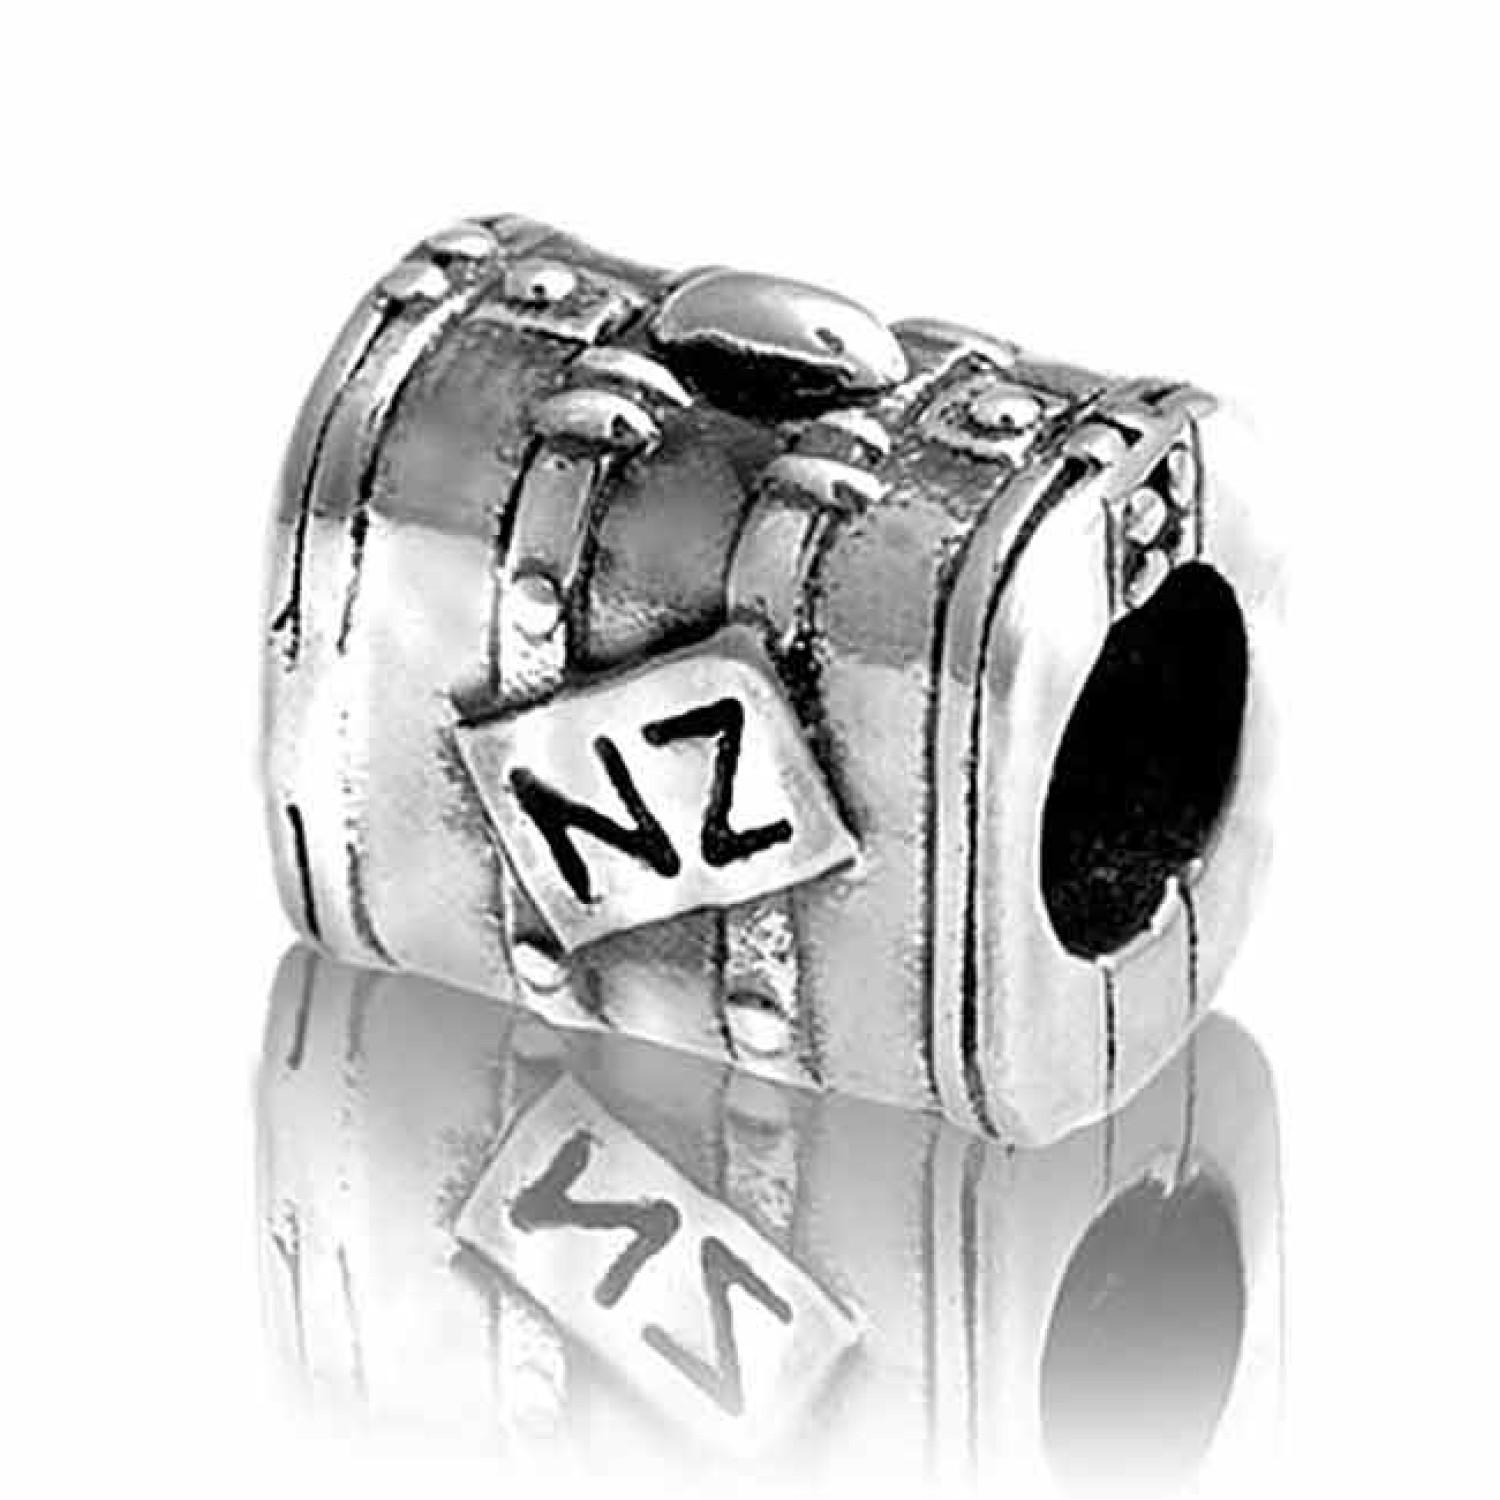 LK059 Evolve Charm OE Travel Case. Evolve Charm Jewellery OE Travel Case By wearing Evolve New Zealand jewellery you celebrate Aotearoa and the most important events in your life in a very visual way, safeguarding your ever evolving memories for a lifetim